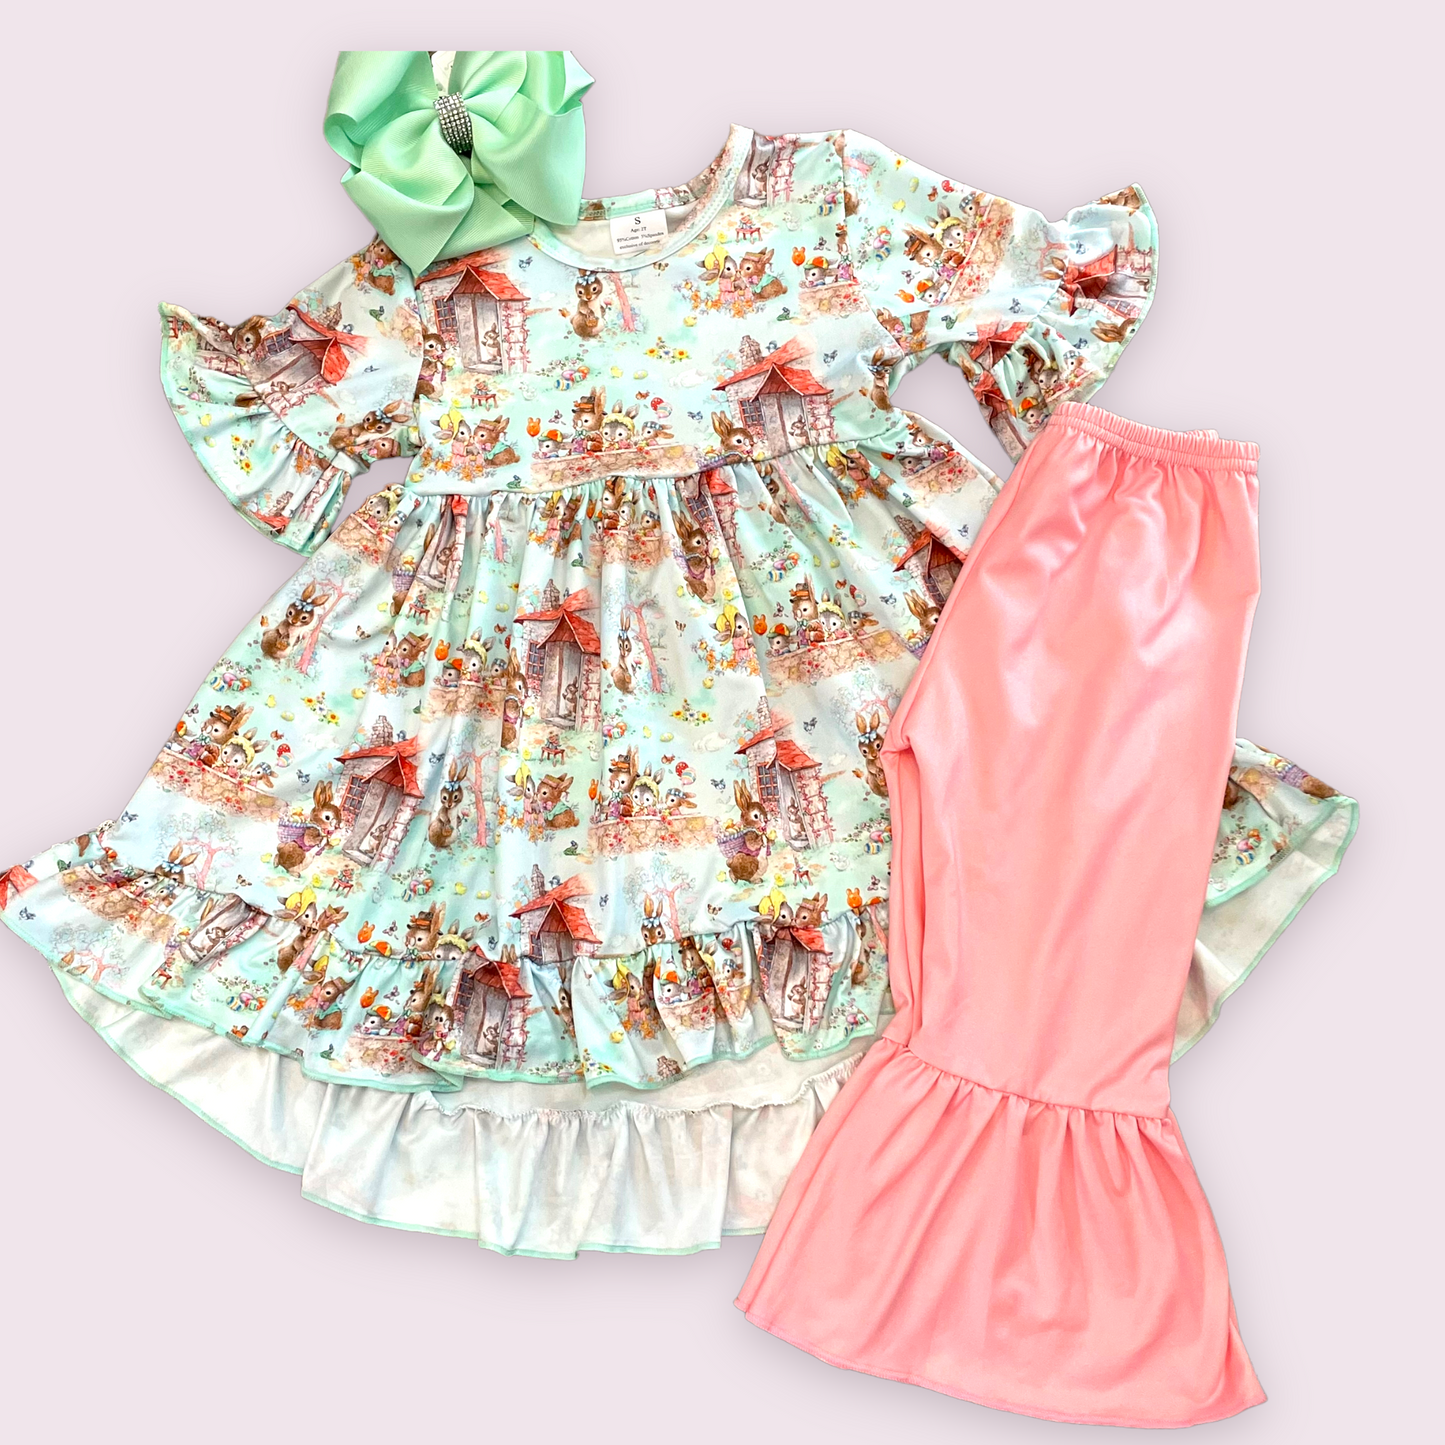 Vintage Print Easter Outfit